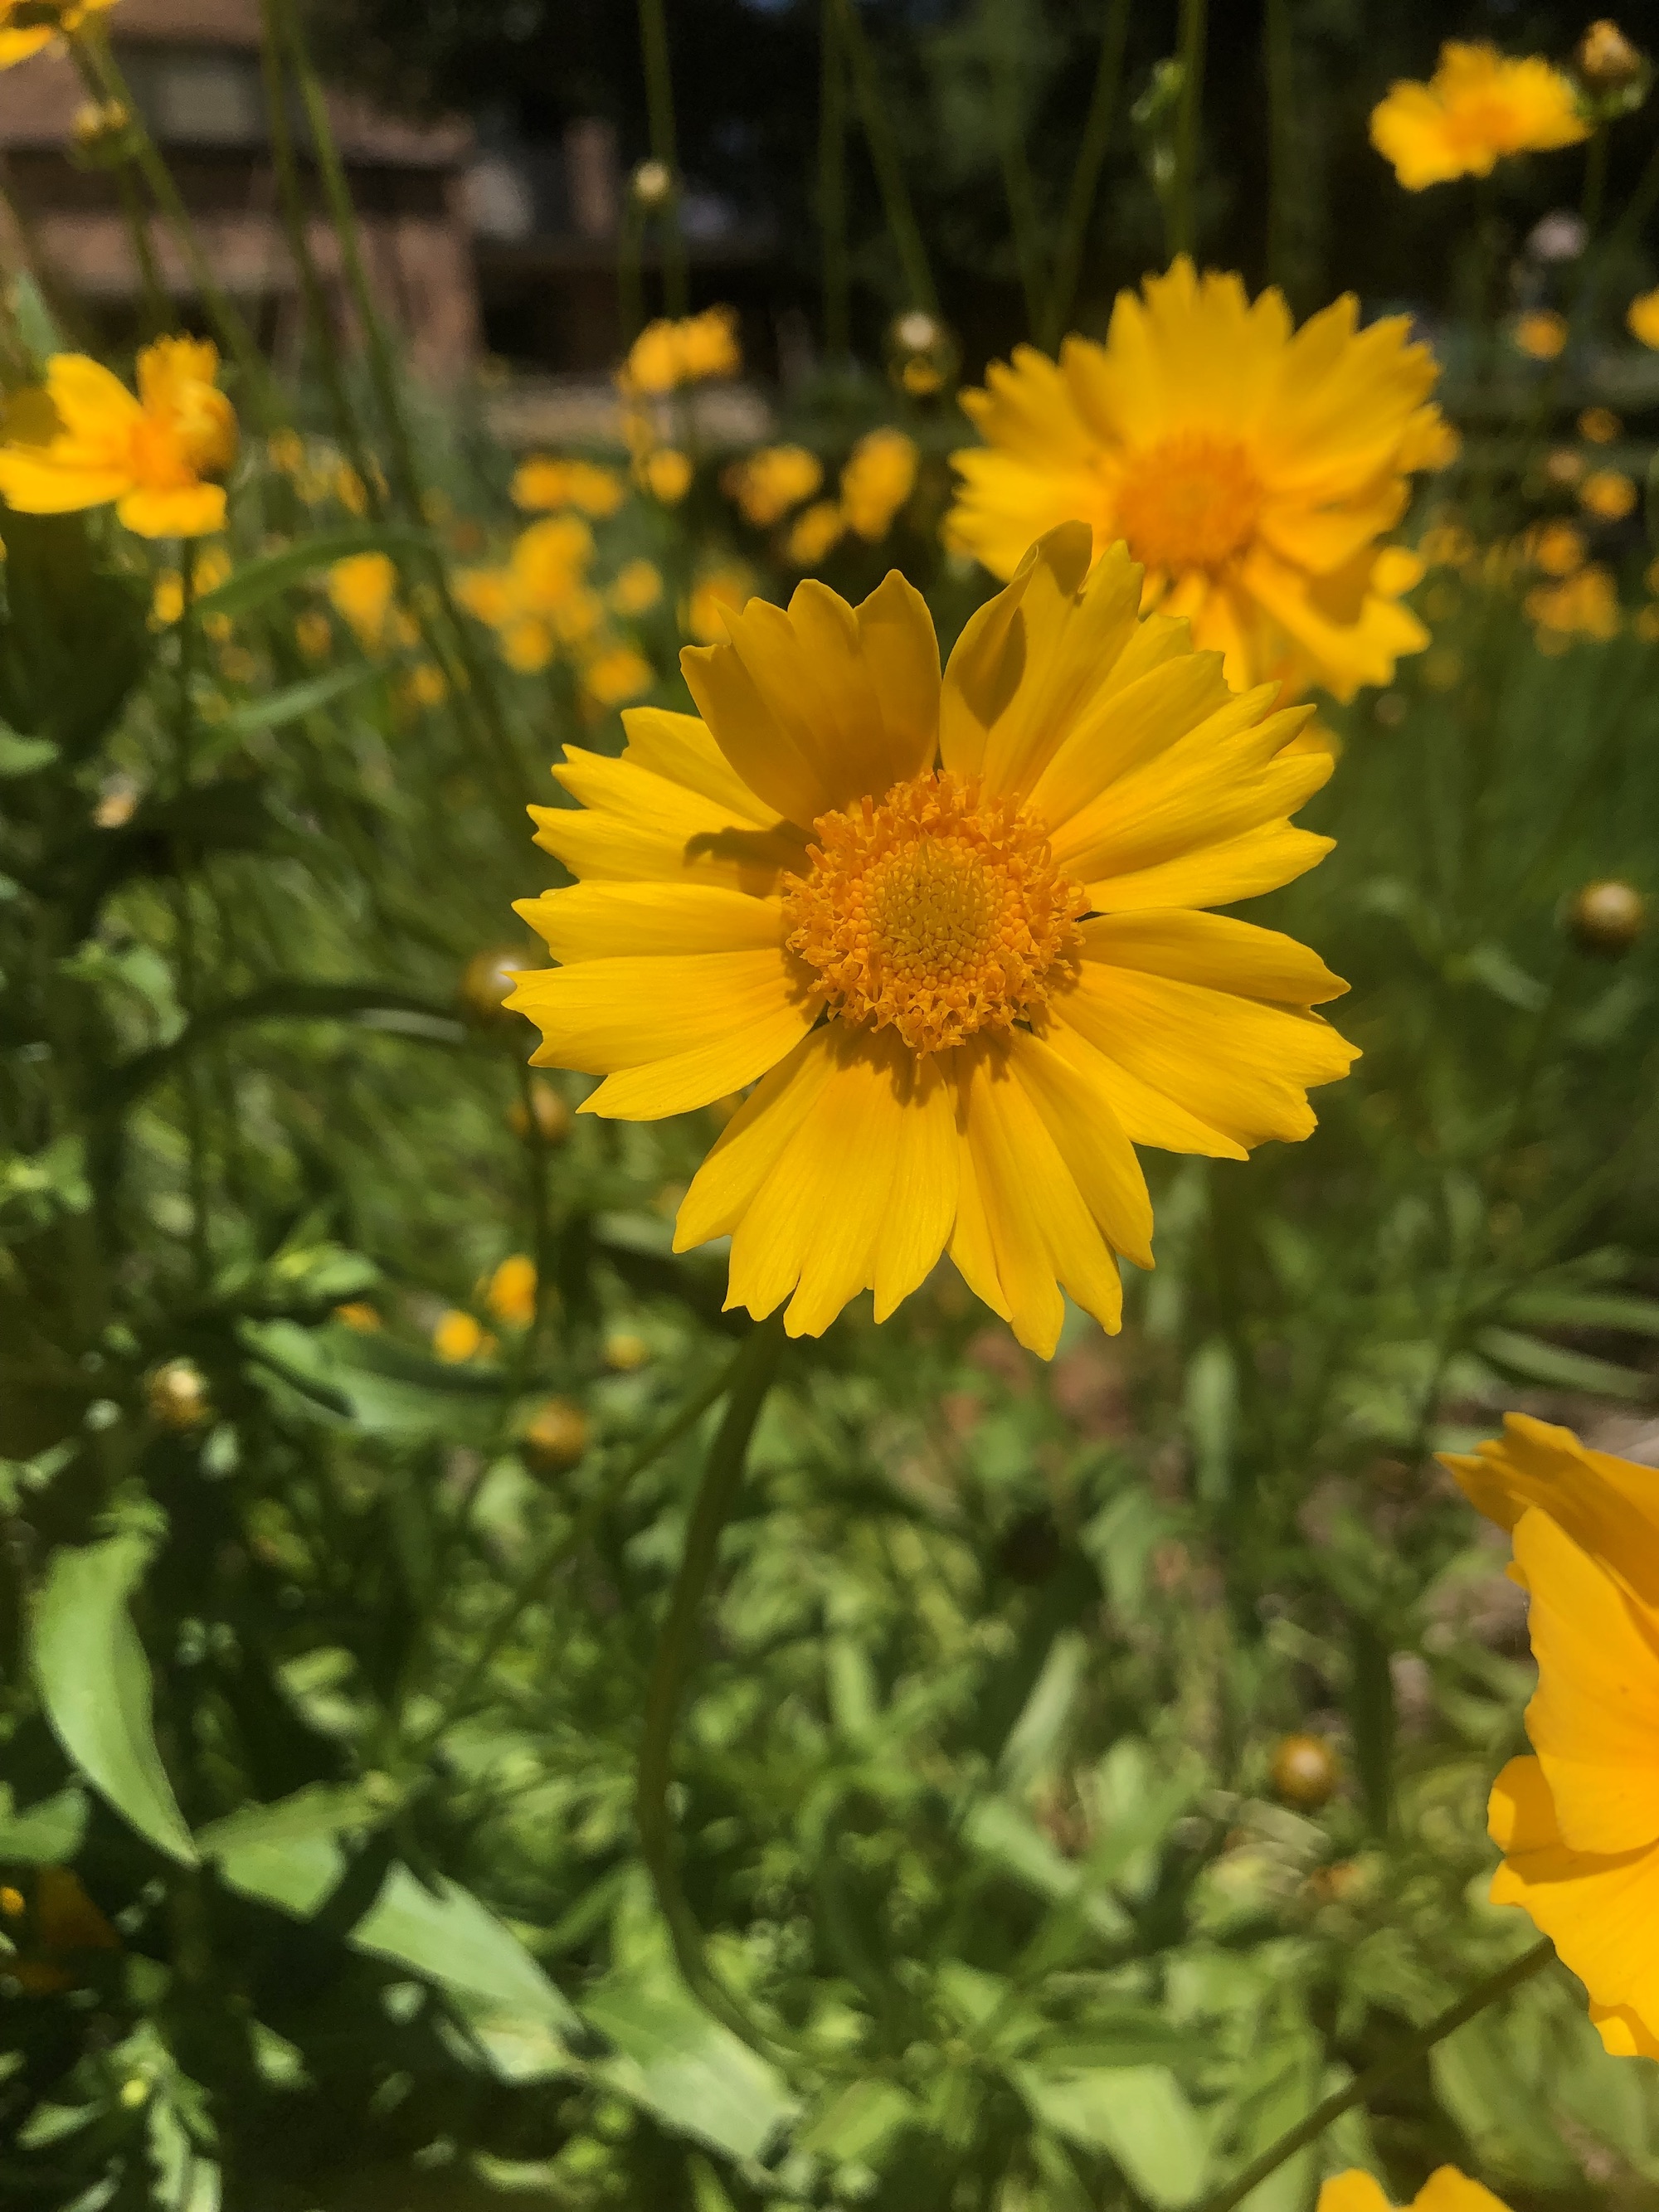 Lance-leaved coreopsis in Wingra Park in Madison, Wisconsin on June 22, 2022.